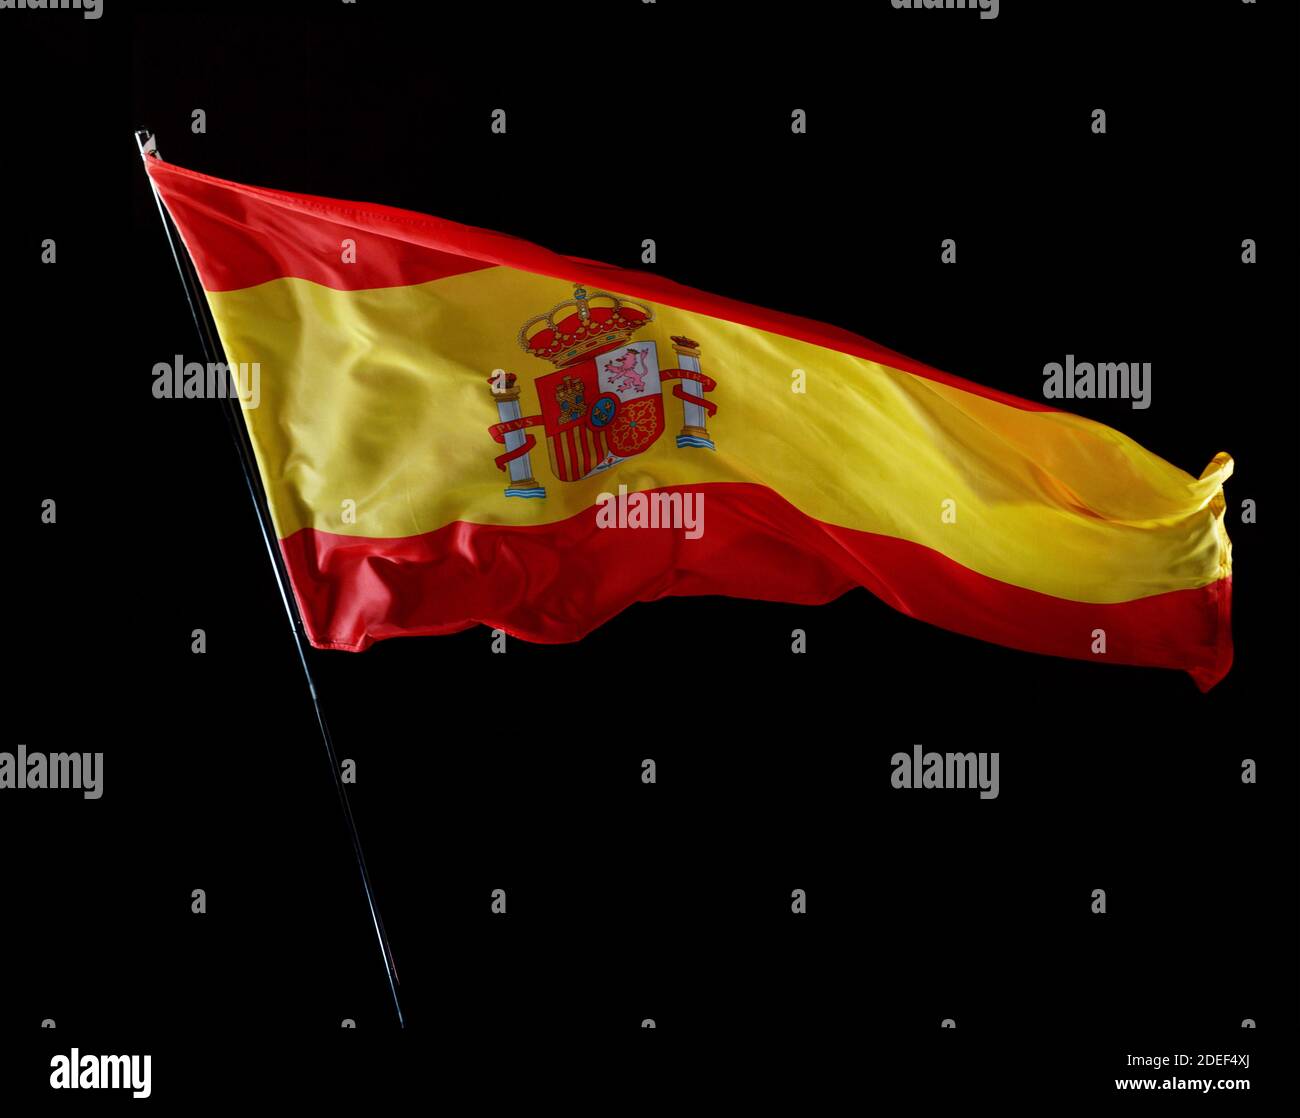 Spanish flag blowing in the wind isolated against a black background, studio shot. Stock Photo